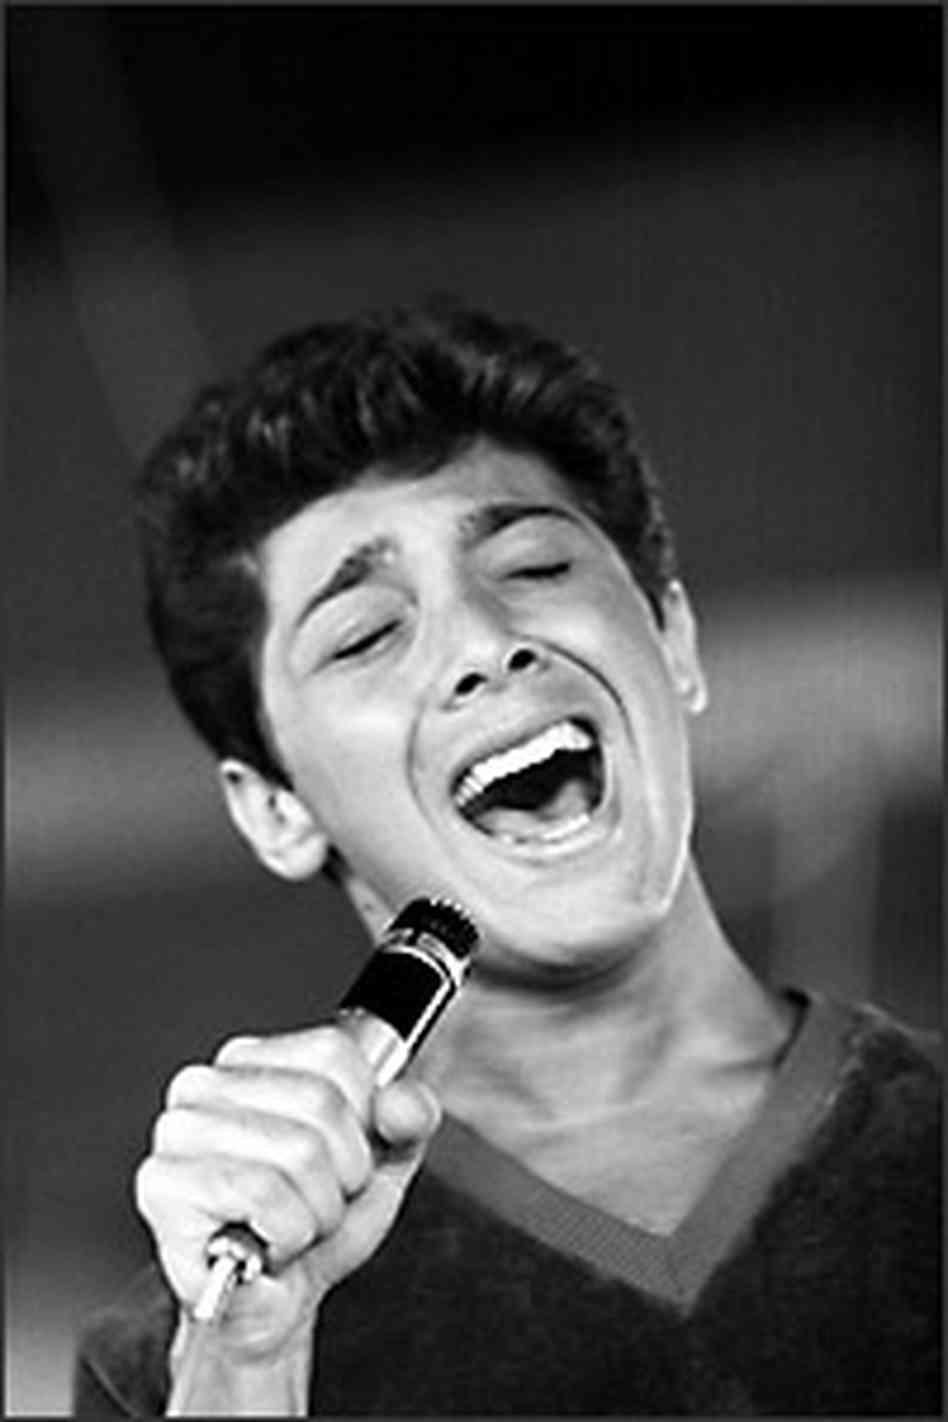 Paul Anka s musical style Genre: Soft Rock Very pop-oriented Sang slow love songs, or ballads Often